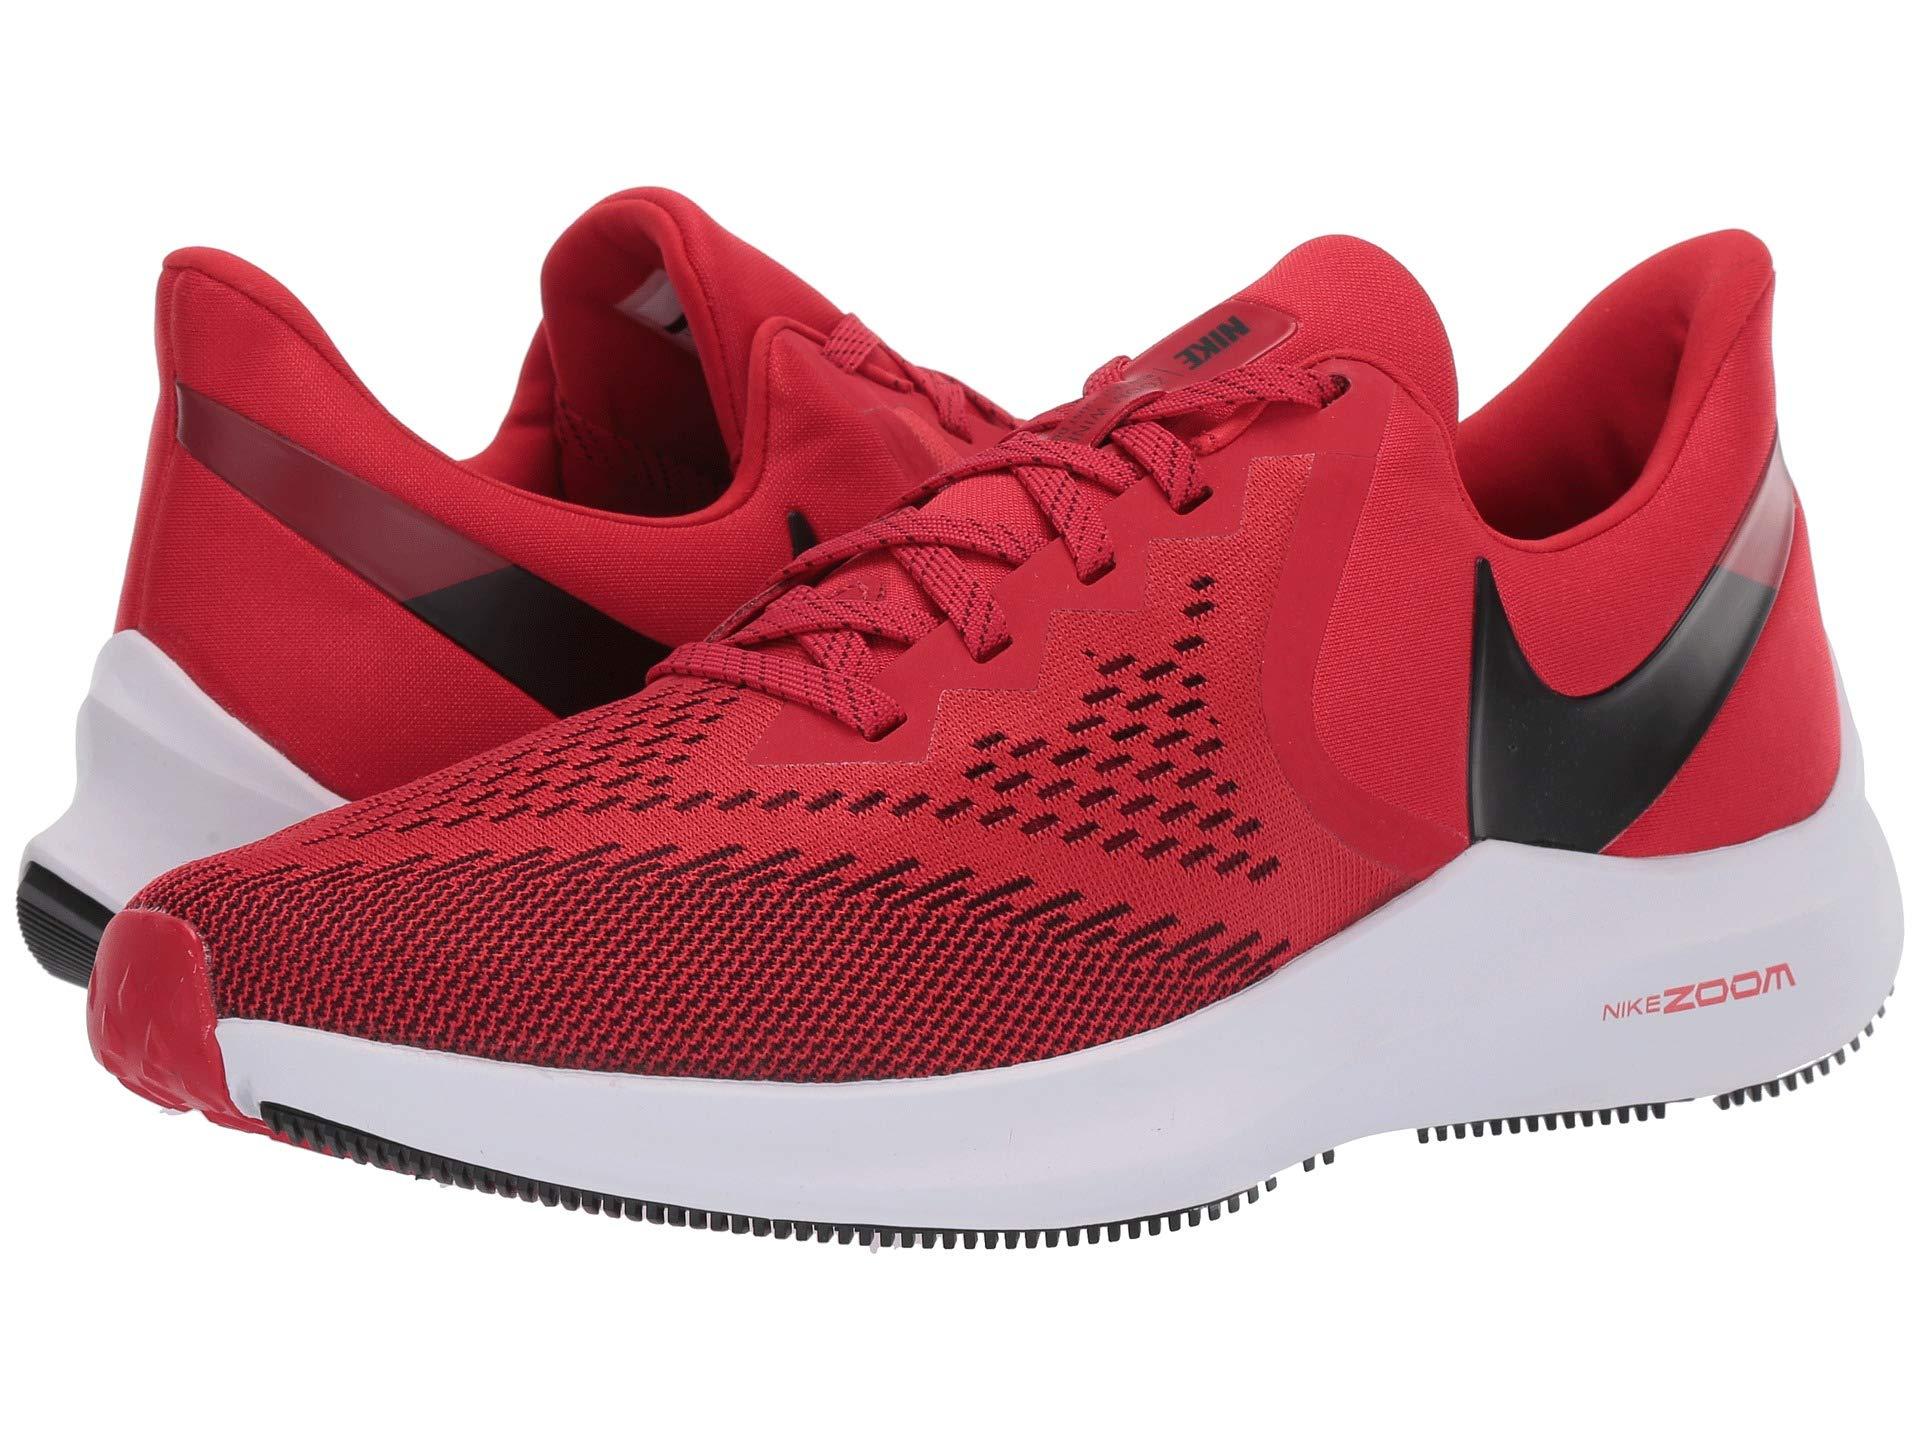 Nike Rubber Air Zoom Winflo 6 in Red 